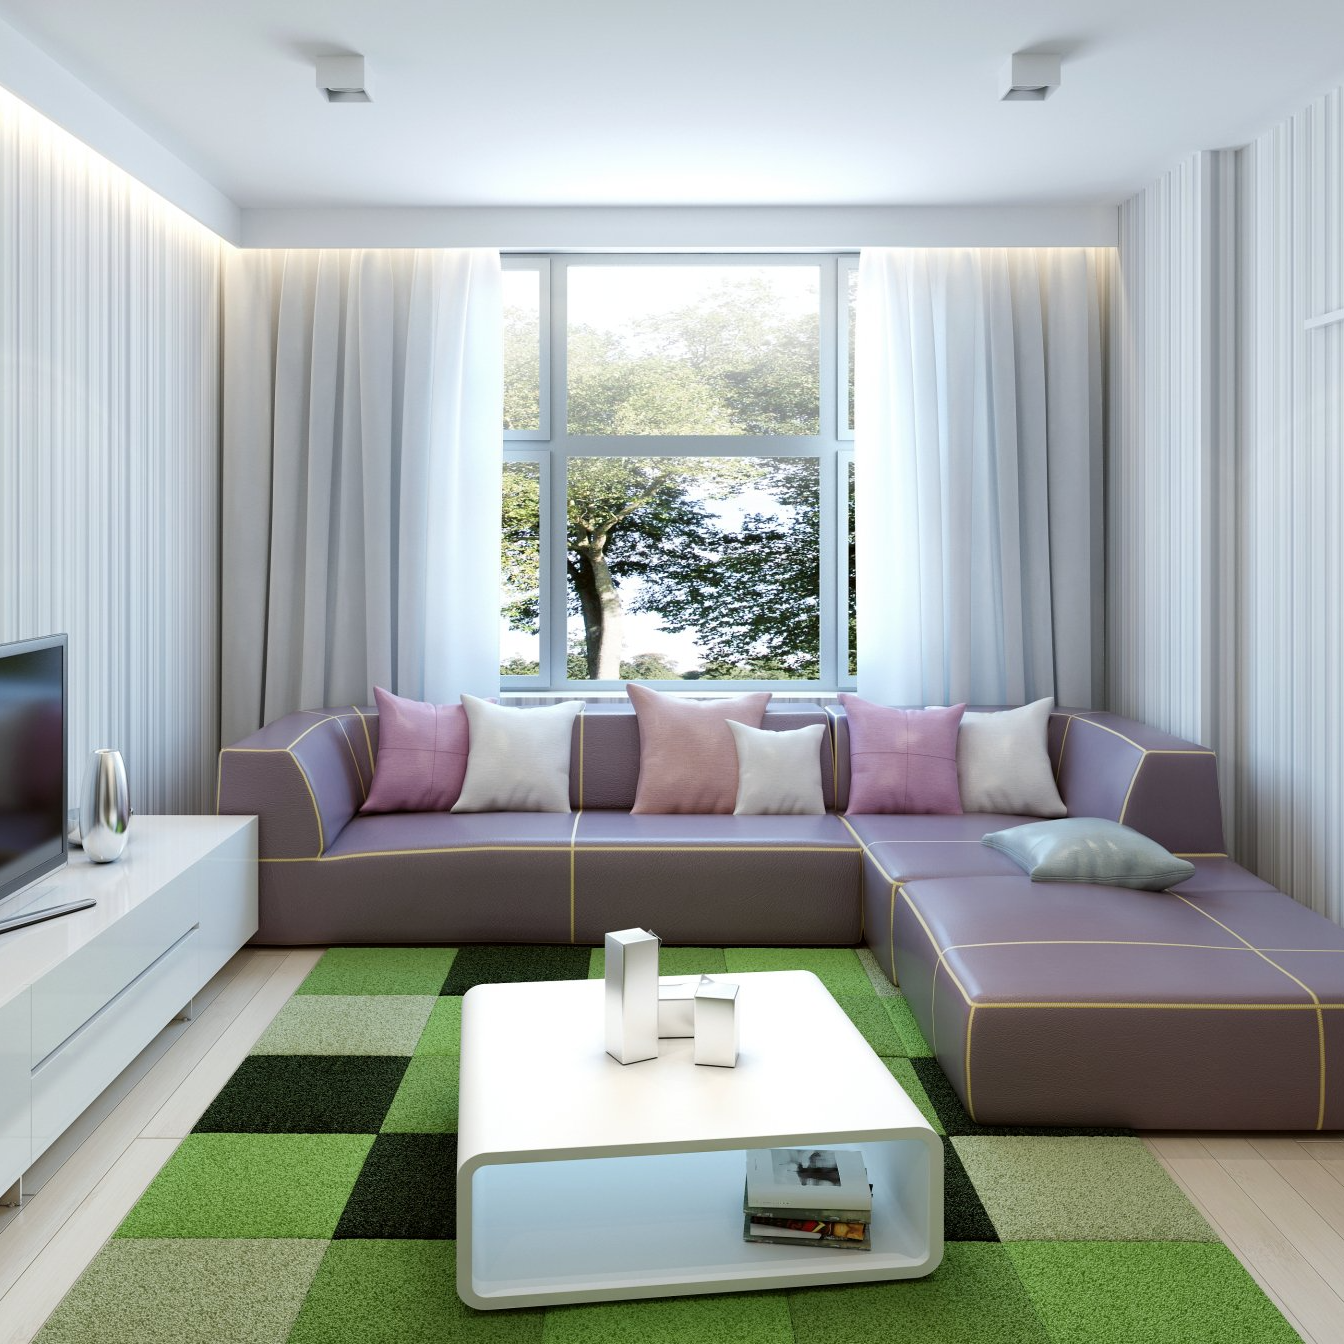 Loungre room with white modern coffee table and tv cabinet on top of green checked rung. Light purple couch full of cushions, behind white blinds pulled half way open for outside view.